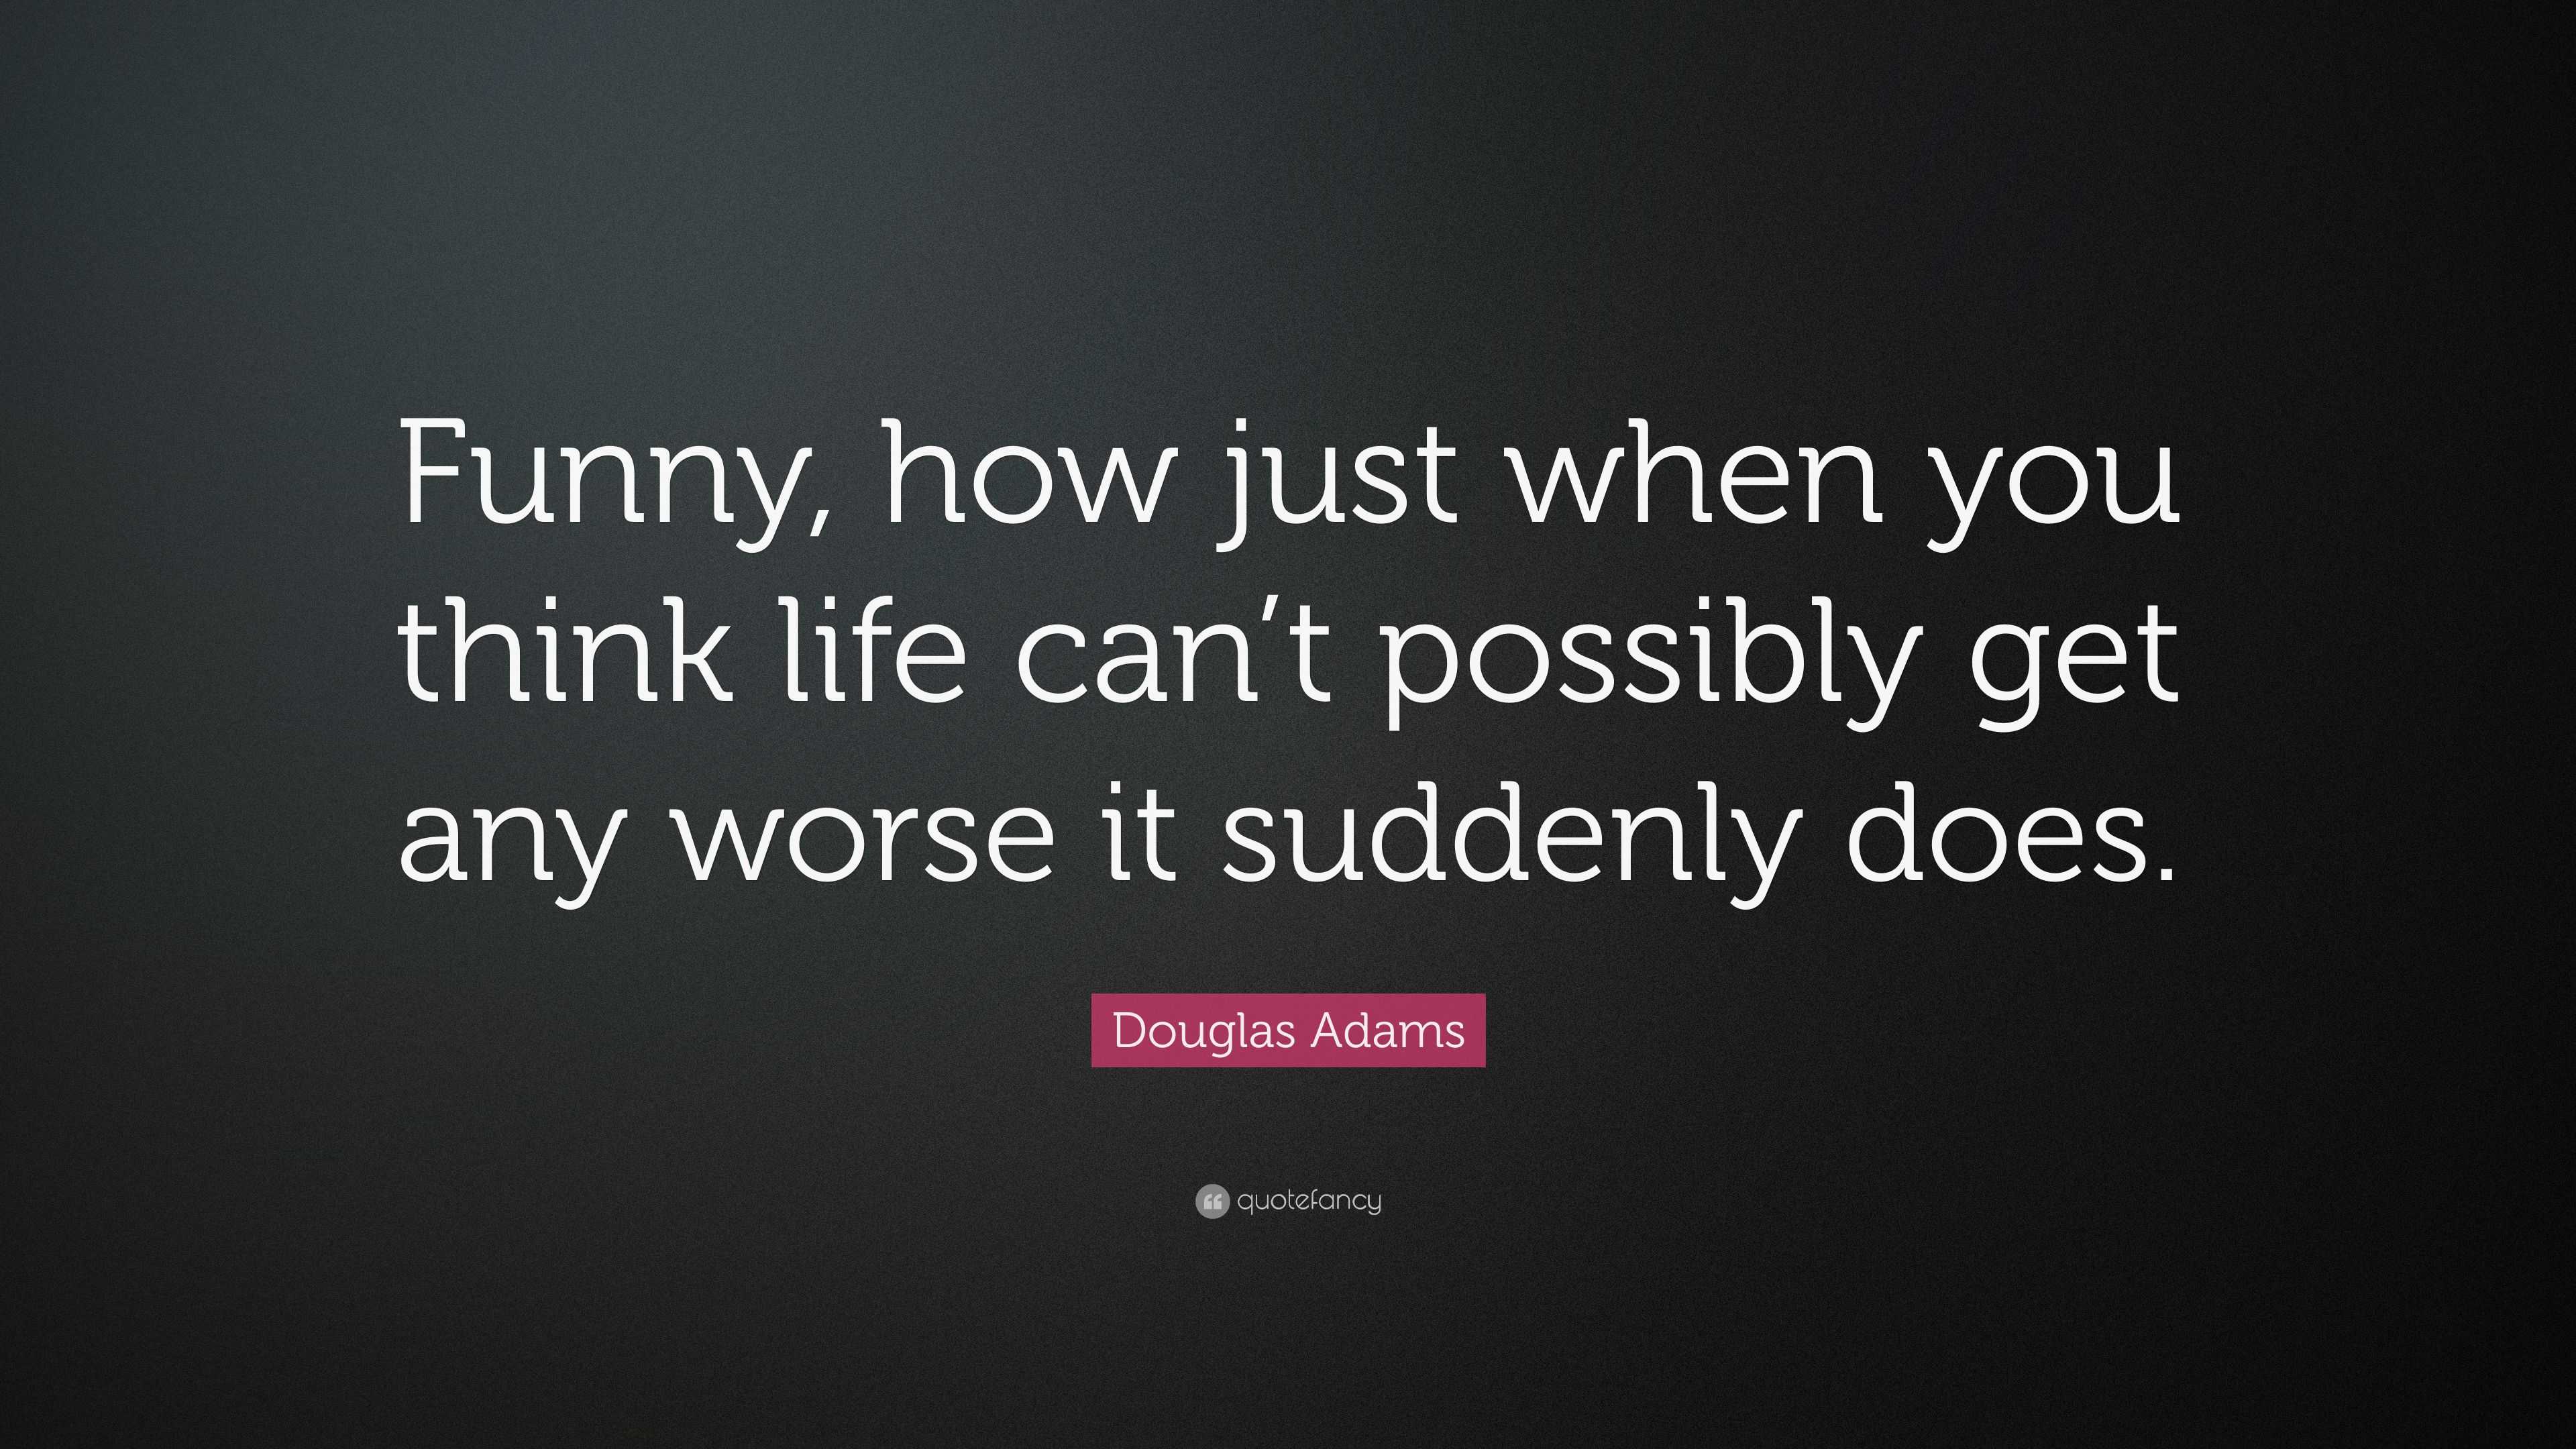 Douglas Adams Quote: “Funny, how just when you think life can't possibly get  any worse